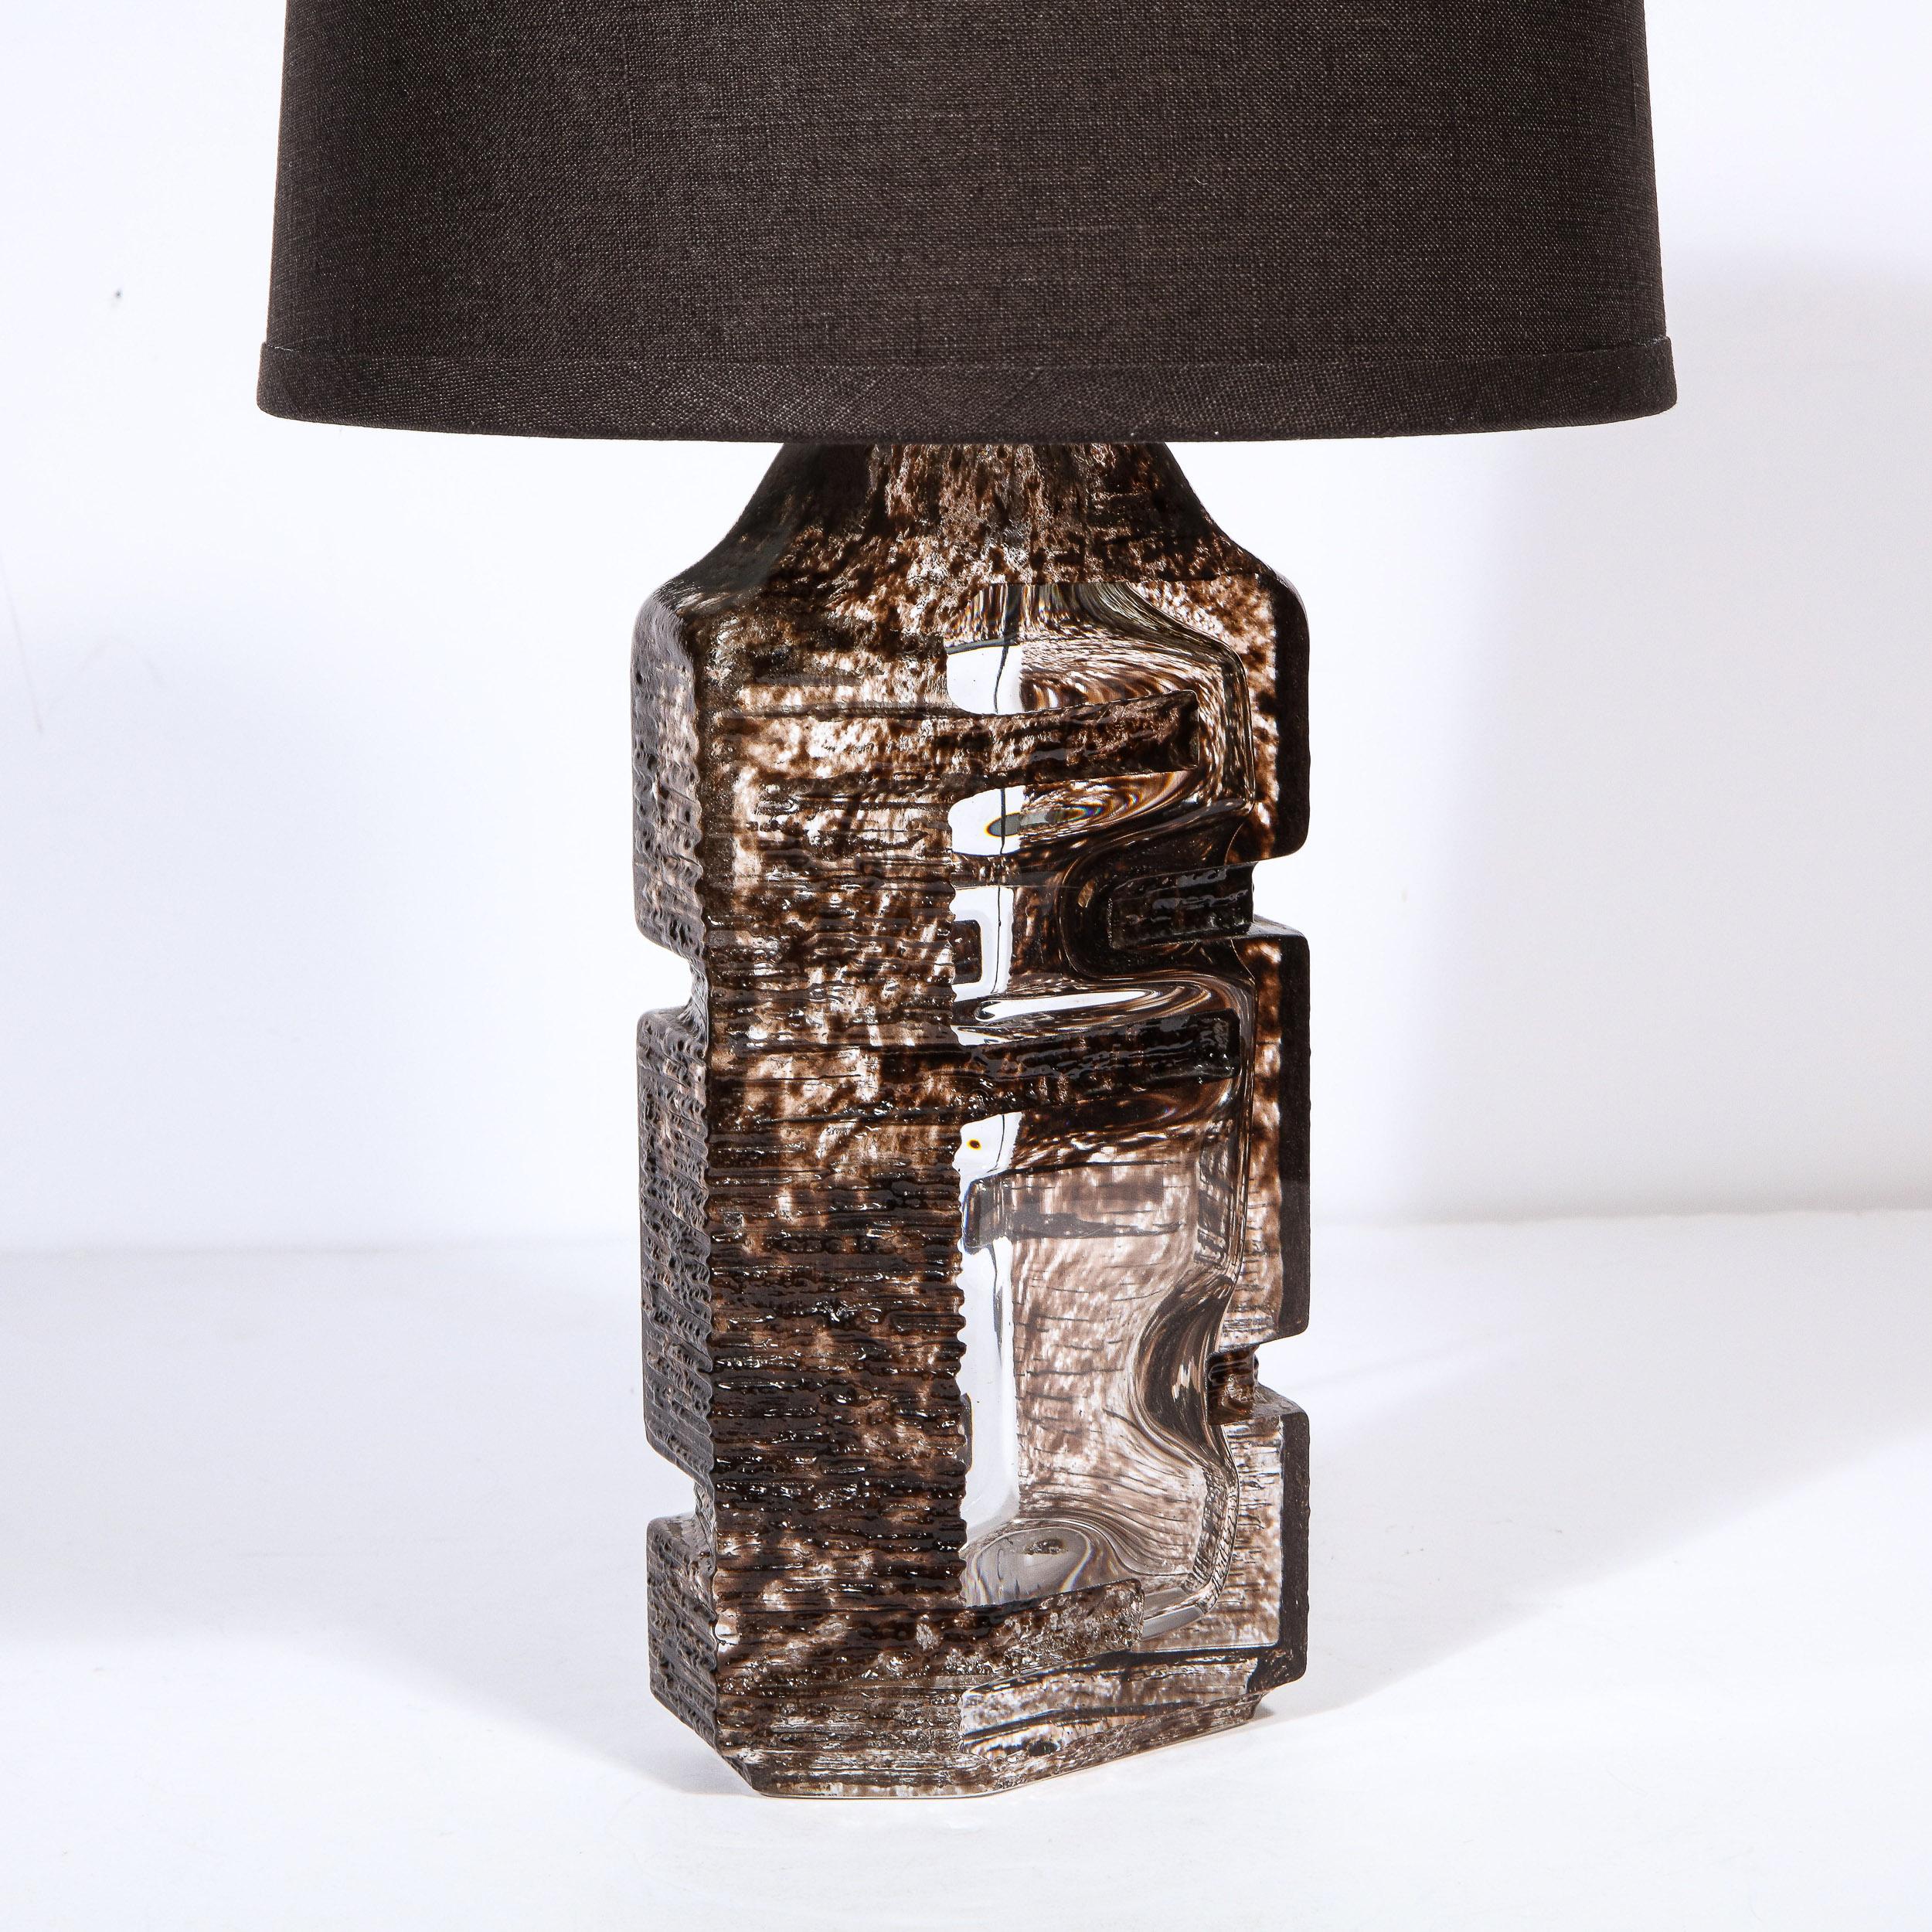 Late 20th Century Mid-Century Modern Brutalist Handblown Glass Table Lamp Signed Daum For Sale